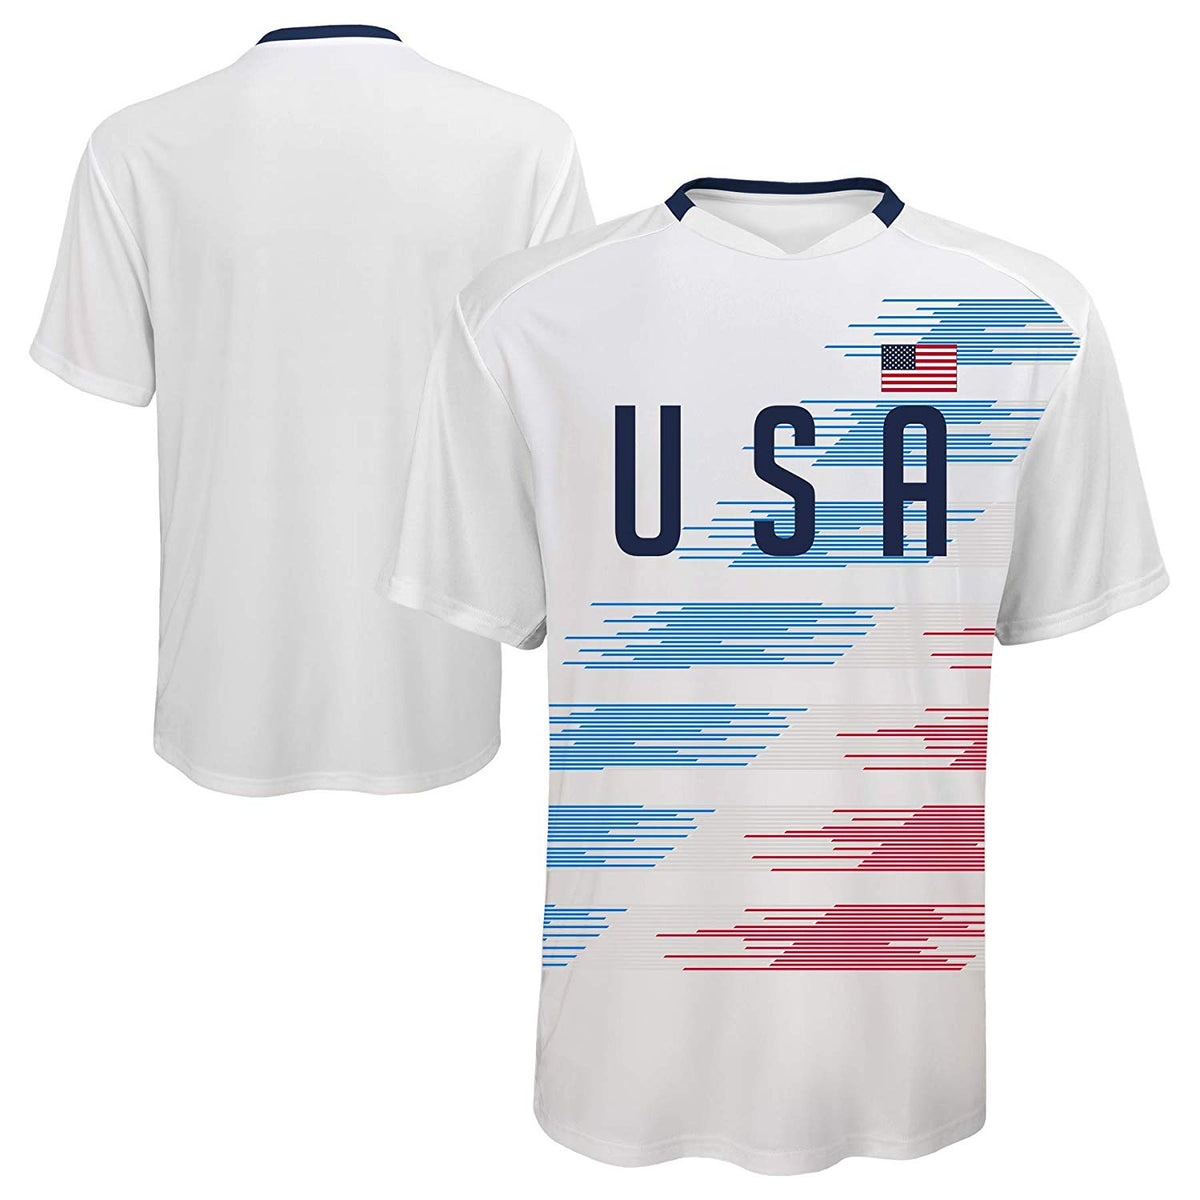 Team USA Outerstuff Soccer Officially Licensed Youth S/S Sublimation J